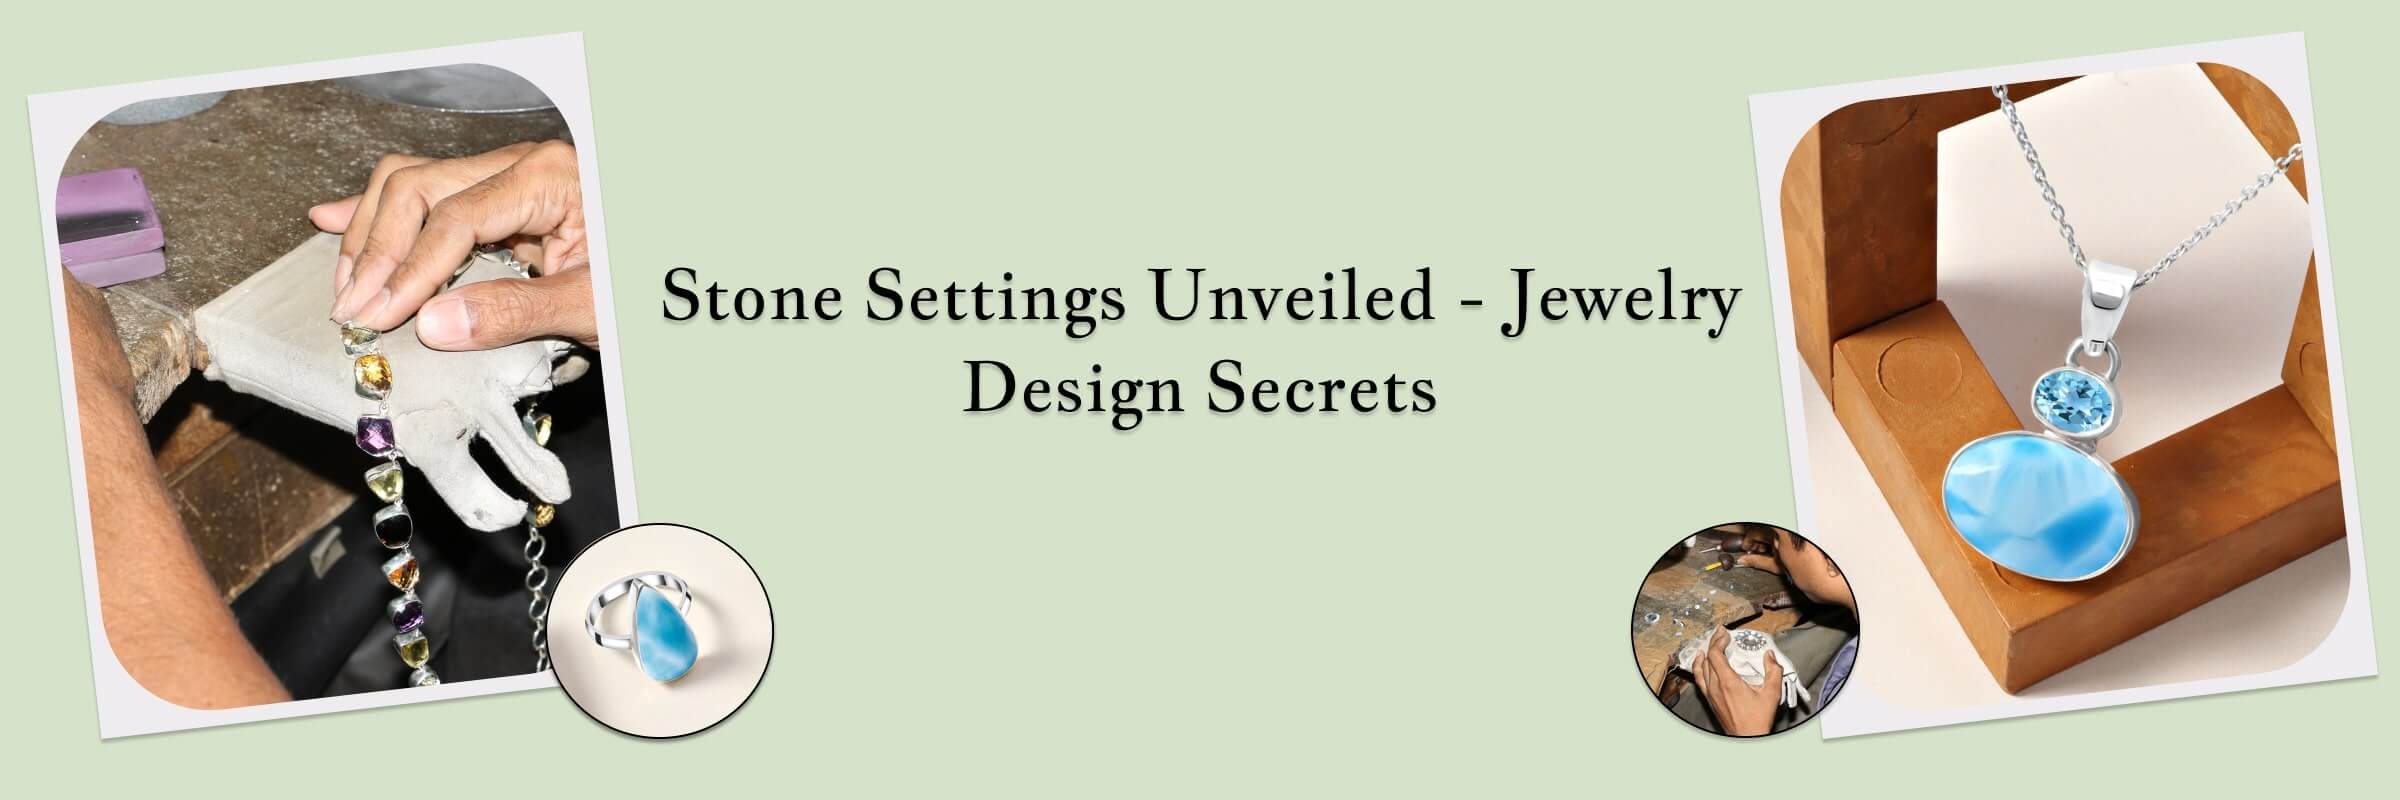 Types of Stone Settings and Methods For Your Jewelry Designs